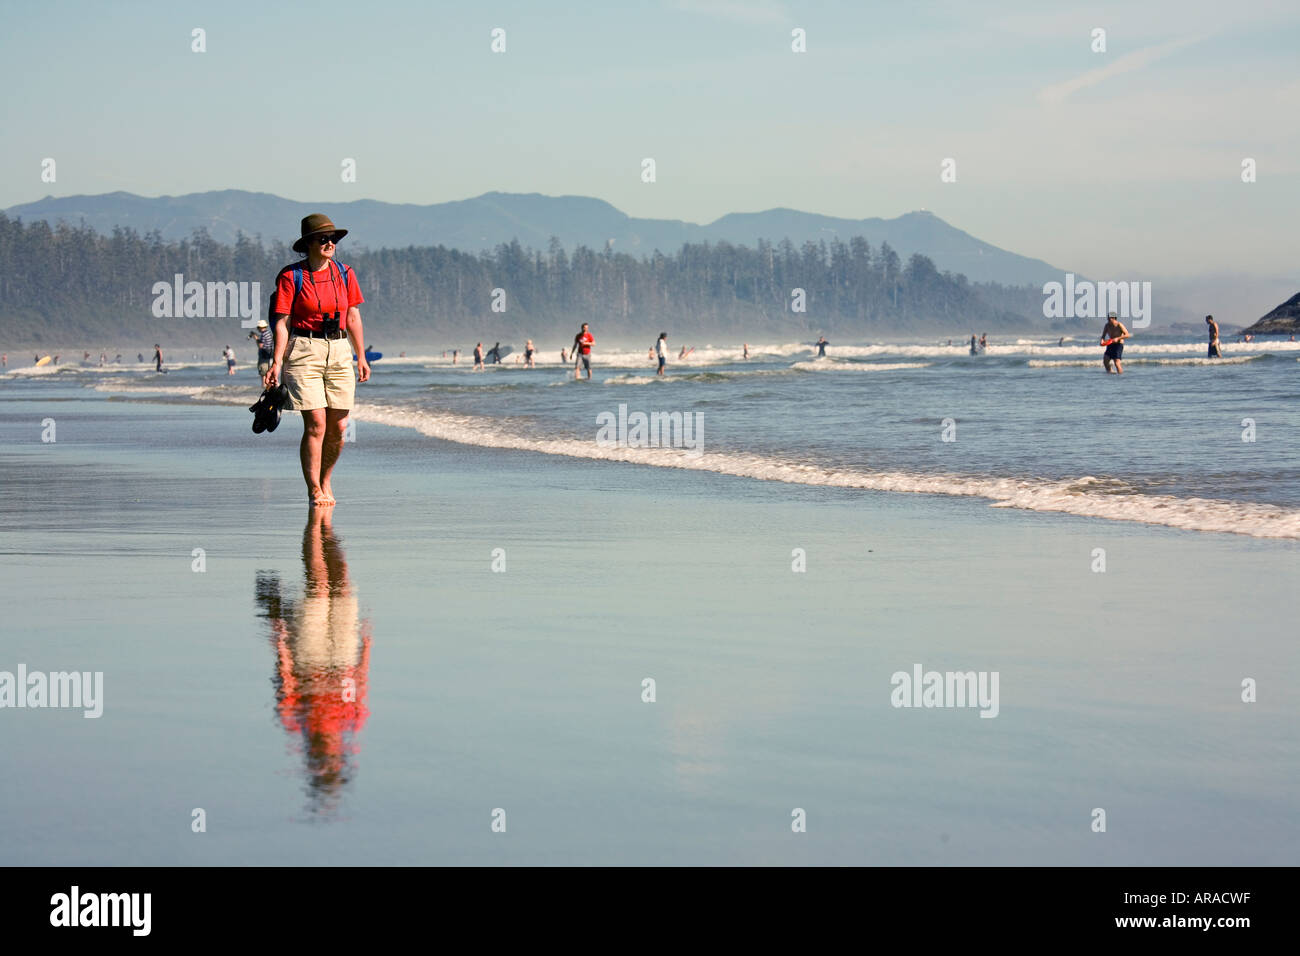 Woman walking barefoot in shallows carrying sandals Long Beach Pacific Rim national park reserve Vancouver island Canada Stock Photo